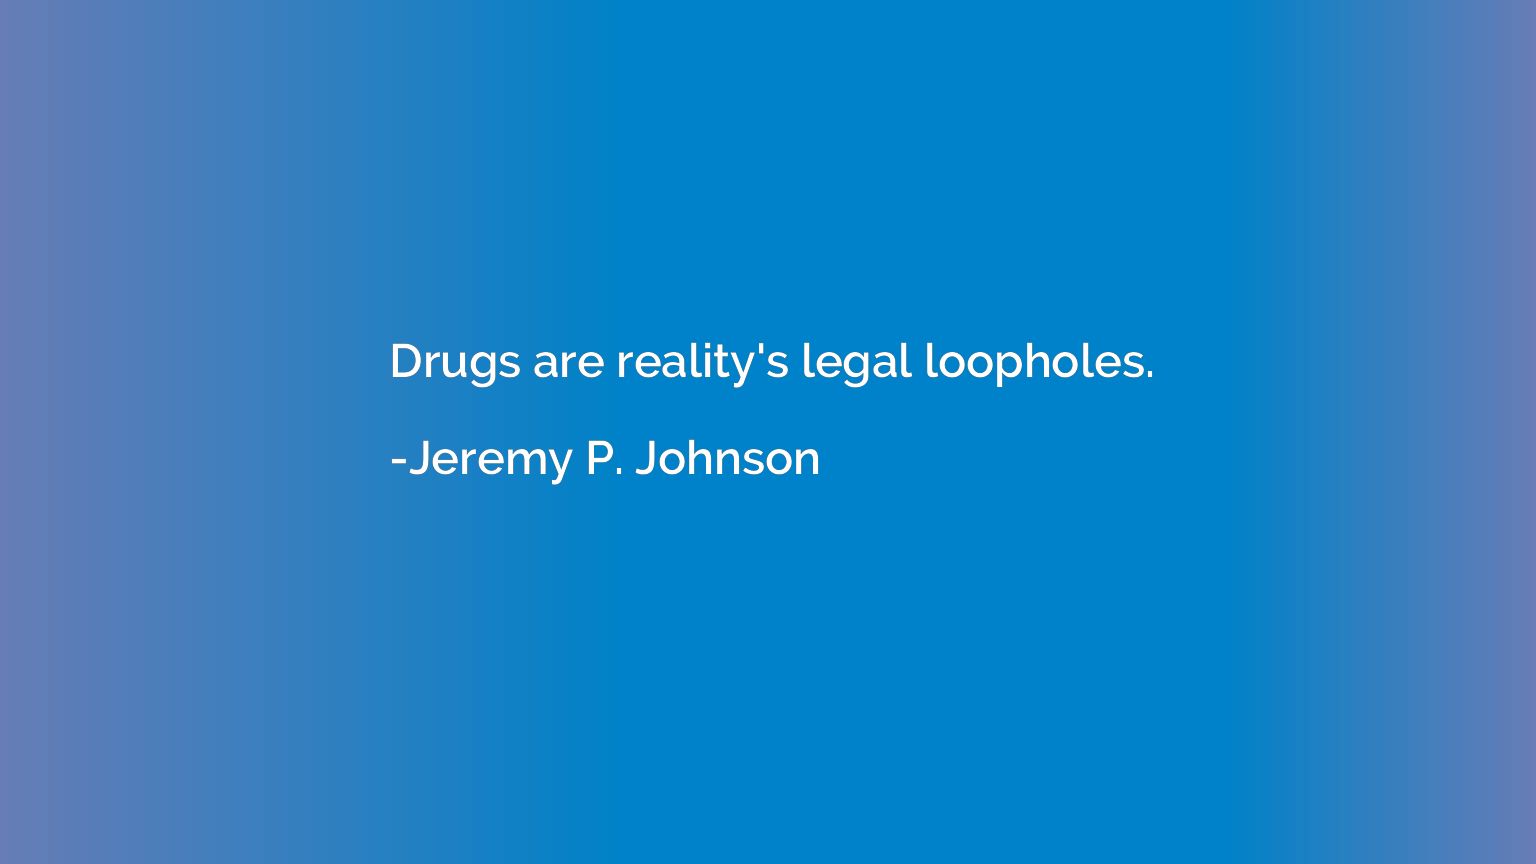 Drugs are reality's legal loopholes.